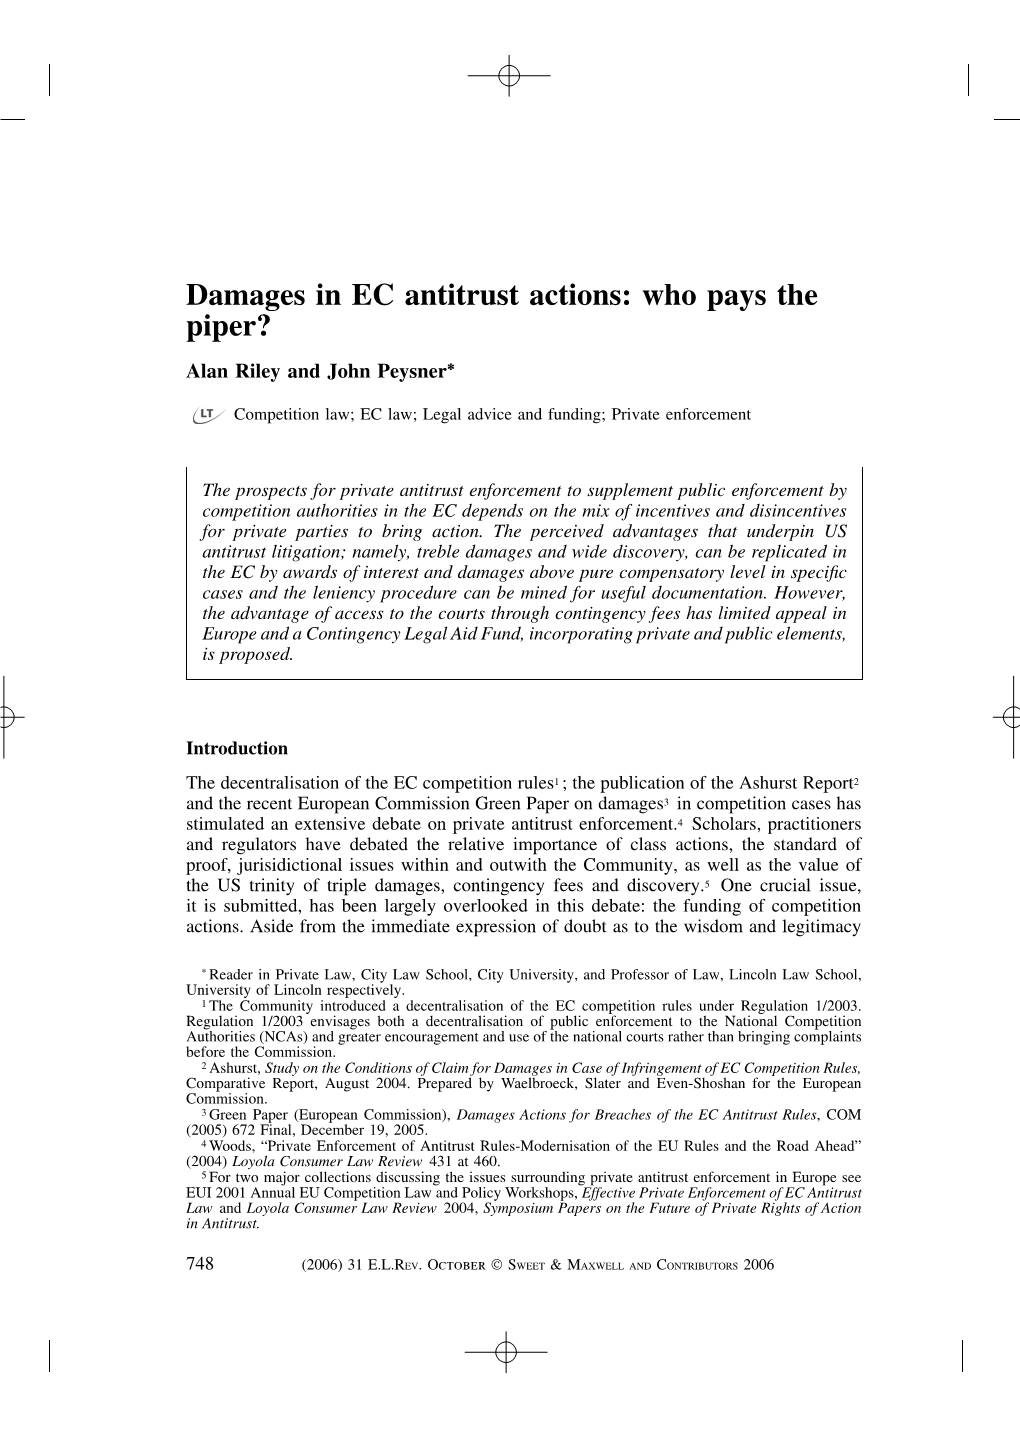 Damages in EC Antitrust Actions: Who Pays the Piper? Alan Riley and John Peysner∗